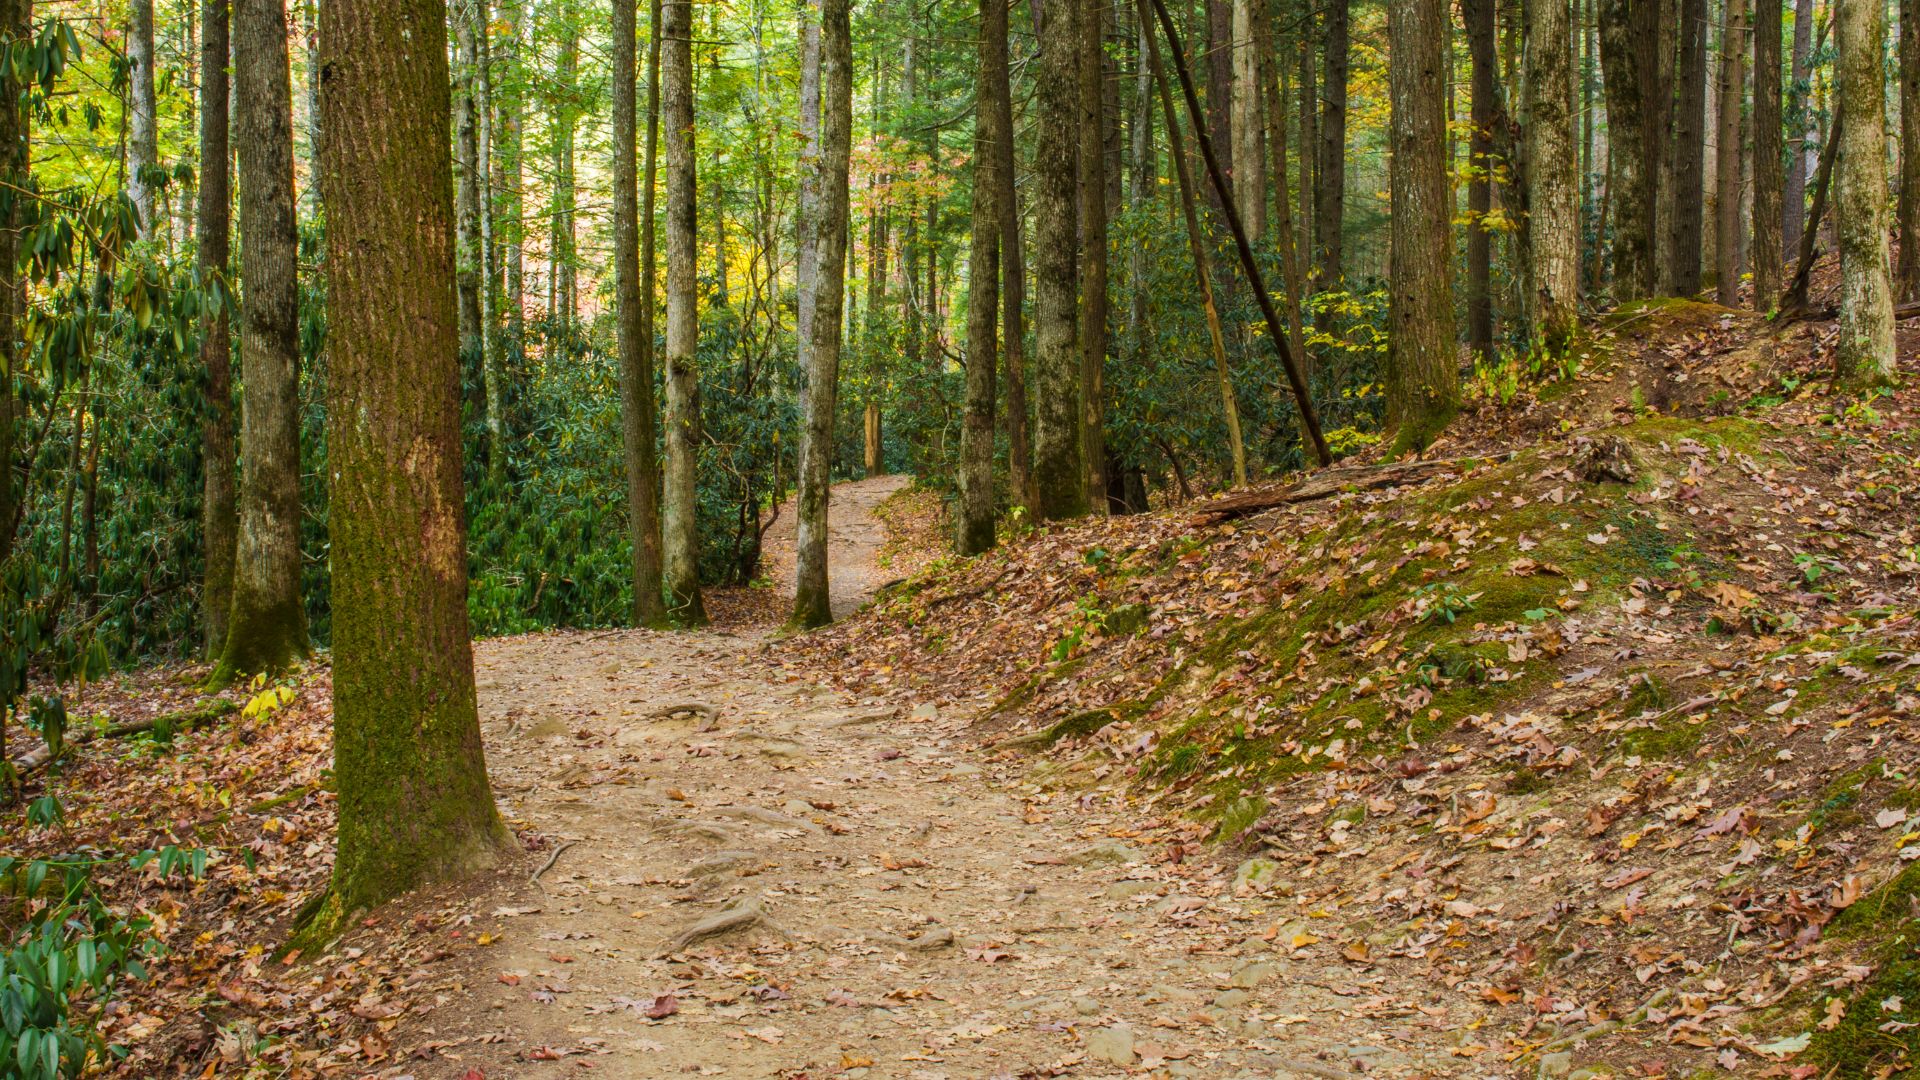 A hiking trail is winding through dense woods